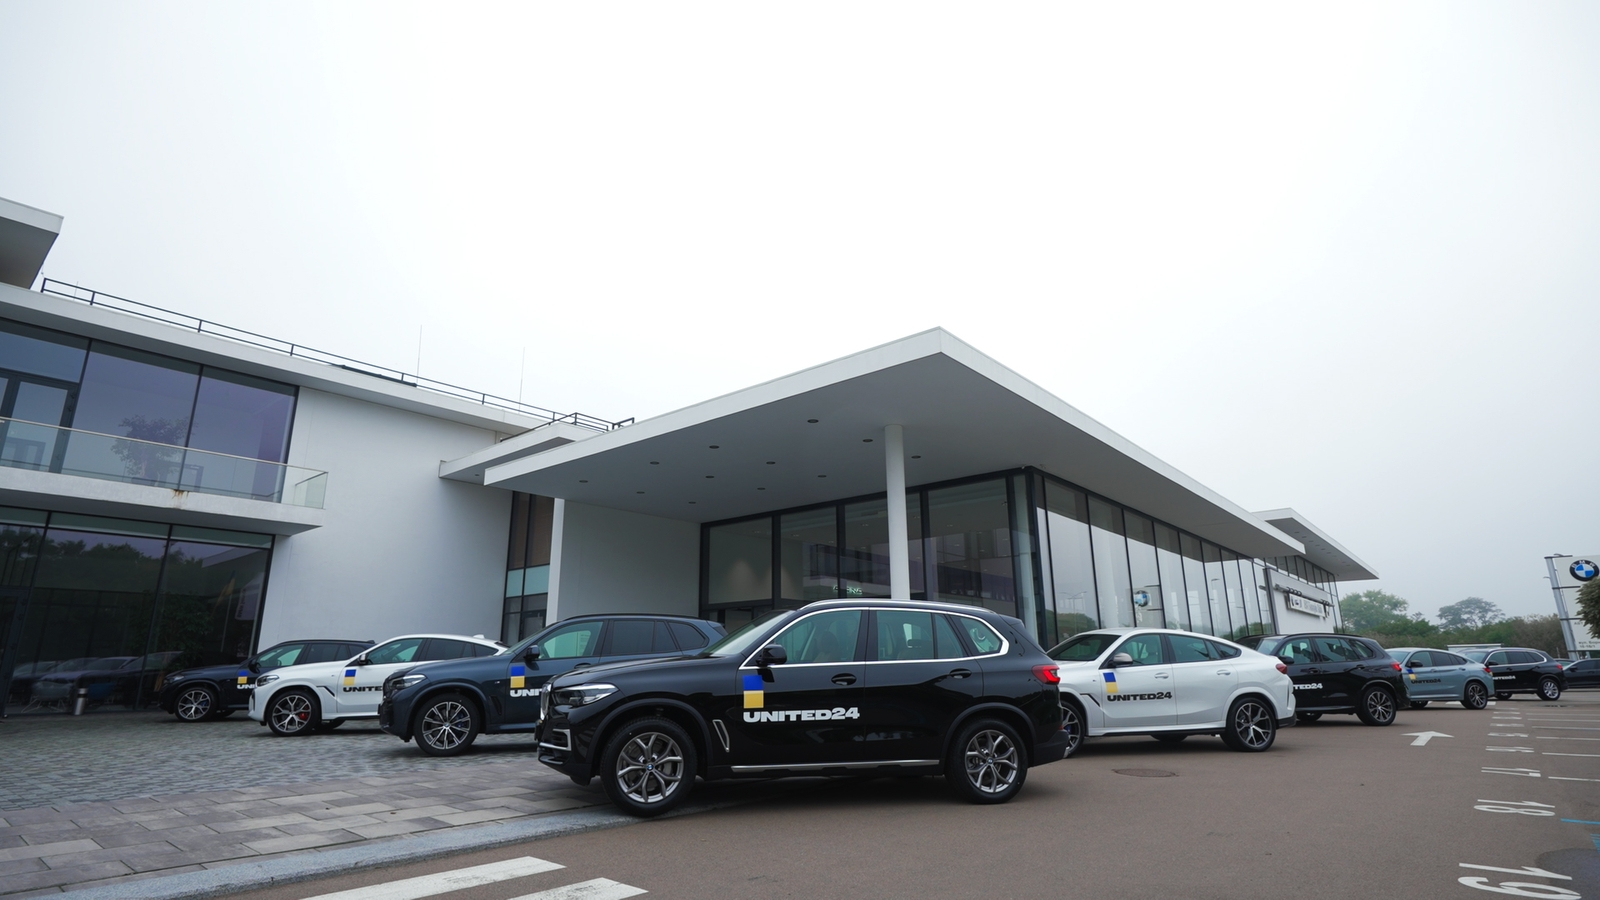 Charitable effort by BMW in support of Ukraine and UNITED24